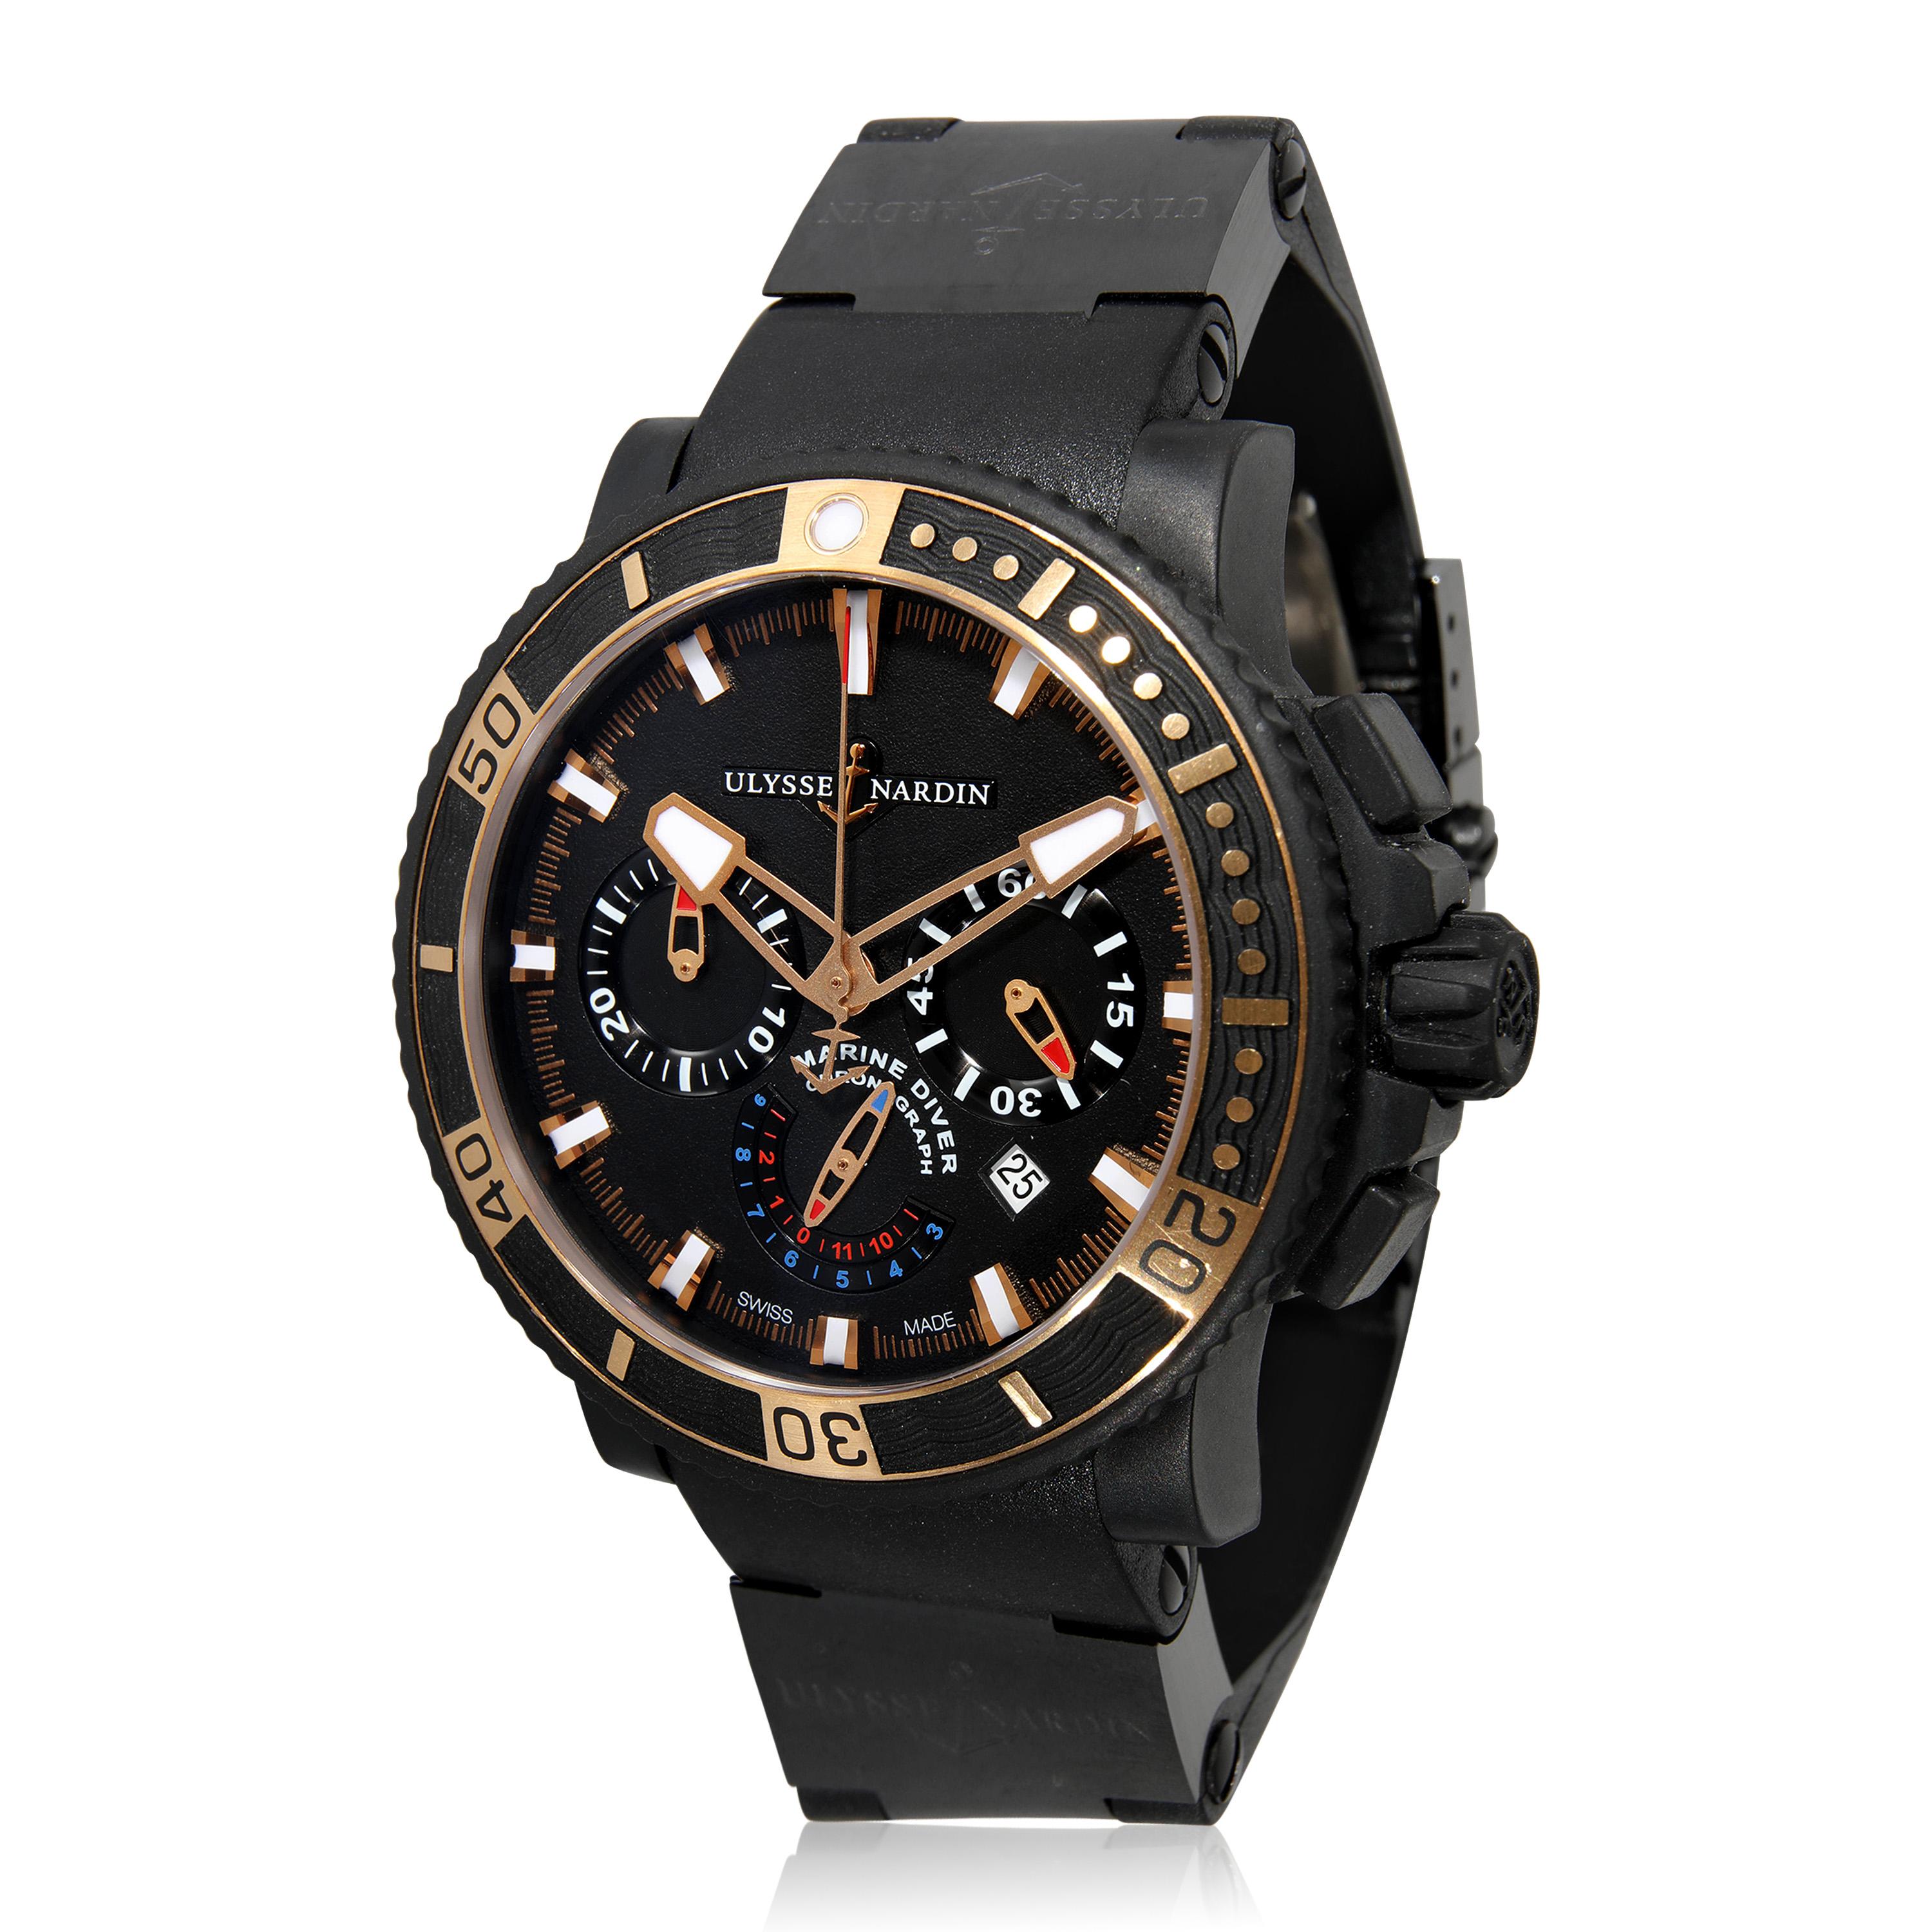 Ulysse Nardin Maxi Marine Dive Black Sea 353-90-3C Men's Watch in  Stainless Ste

SKU: 131534

PRIMARY DETAILS
Brand: Ulysse Nardin
Model: Maxi Marine Dive Black Sea
Country of Origin: Switzerland
Movement Type: Mechanical: Automatic/Kinetic
Year of